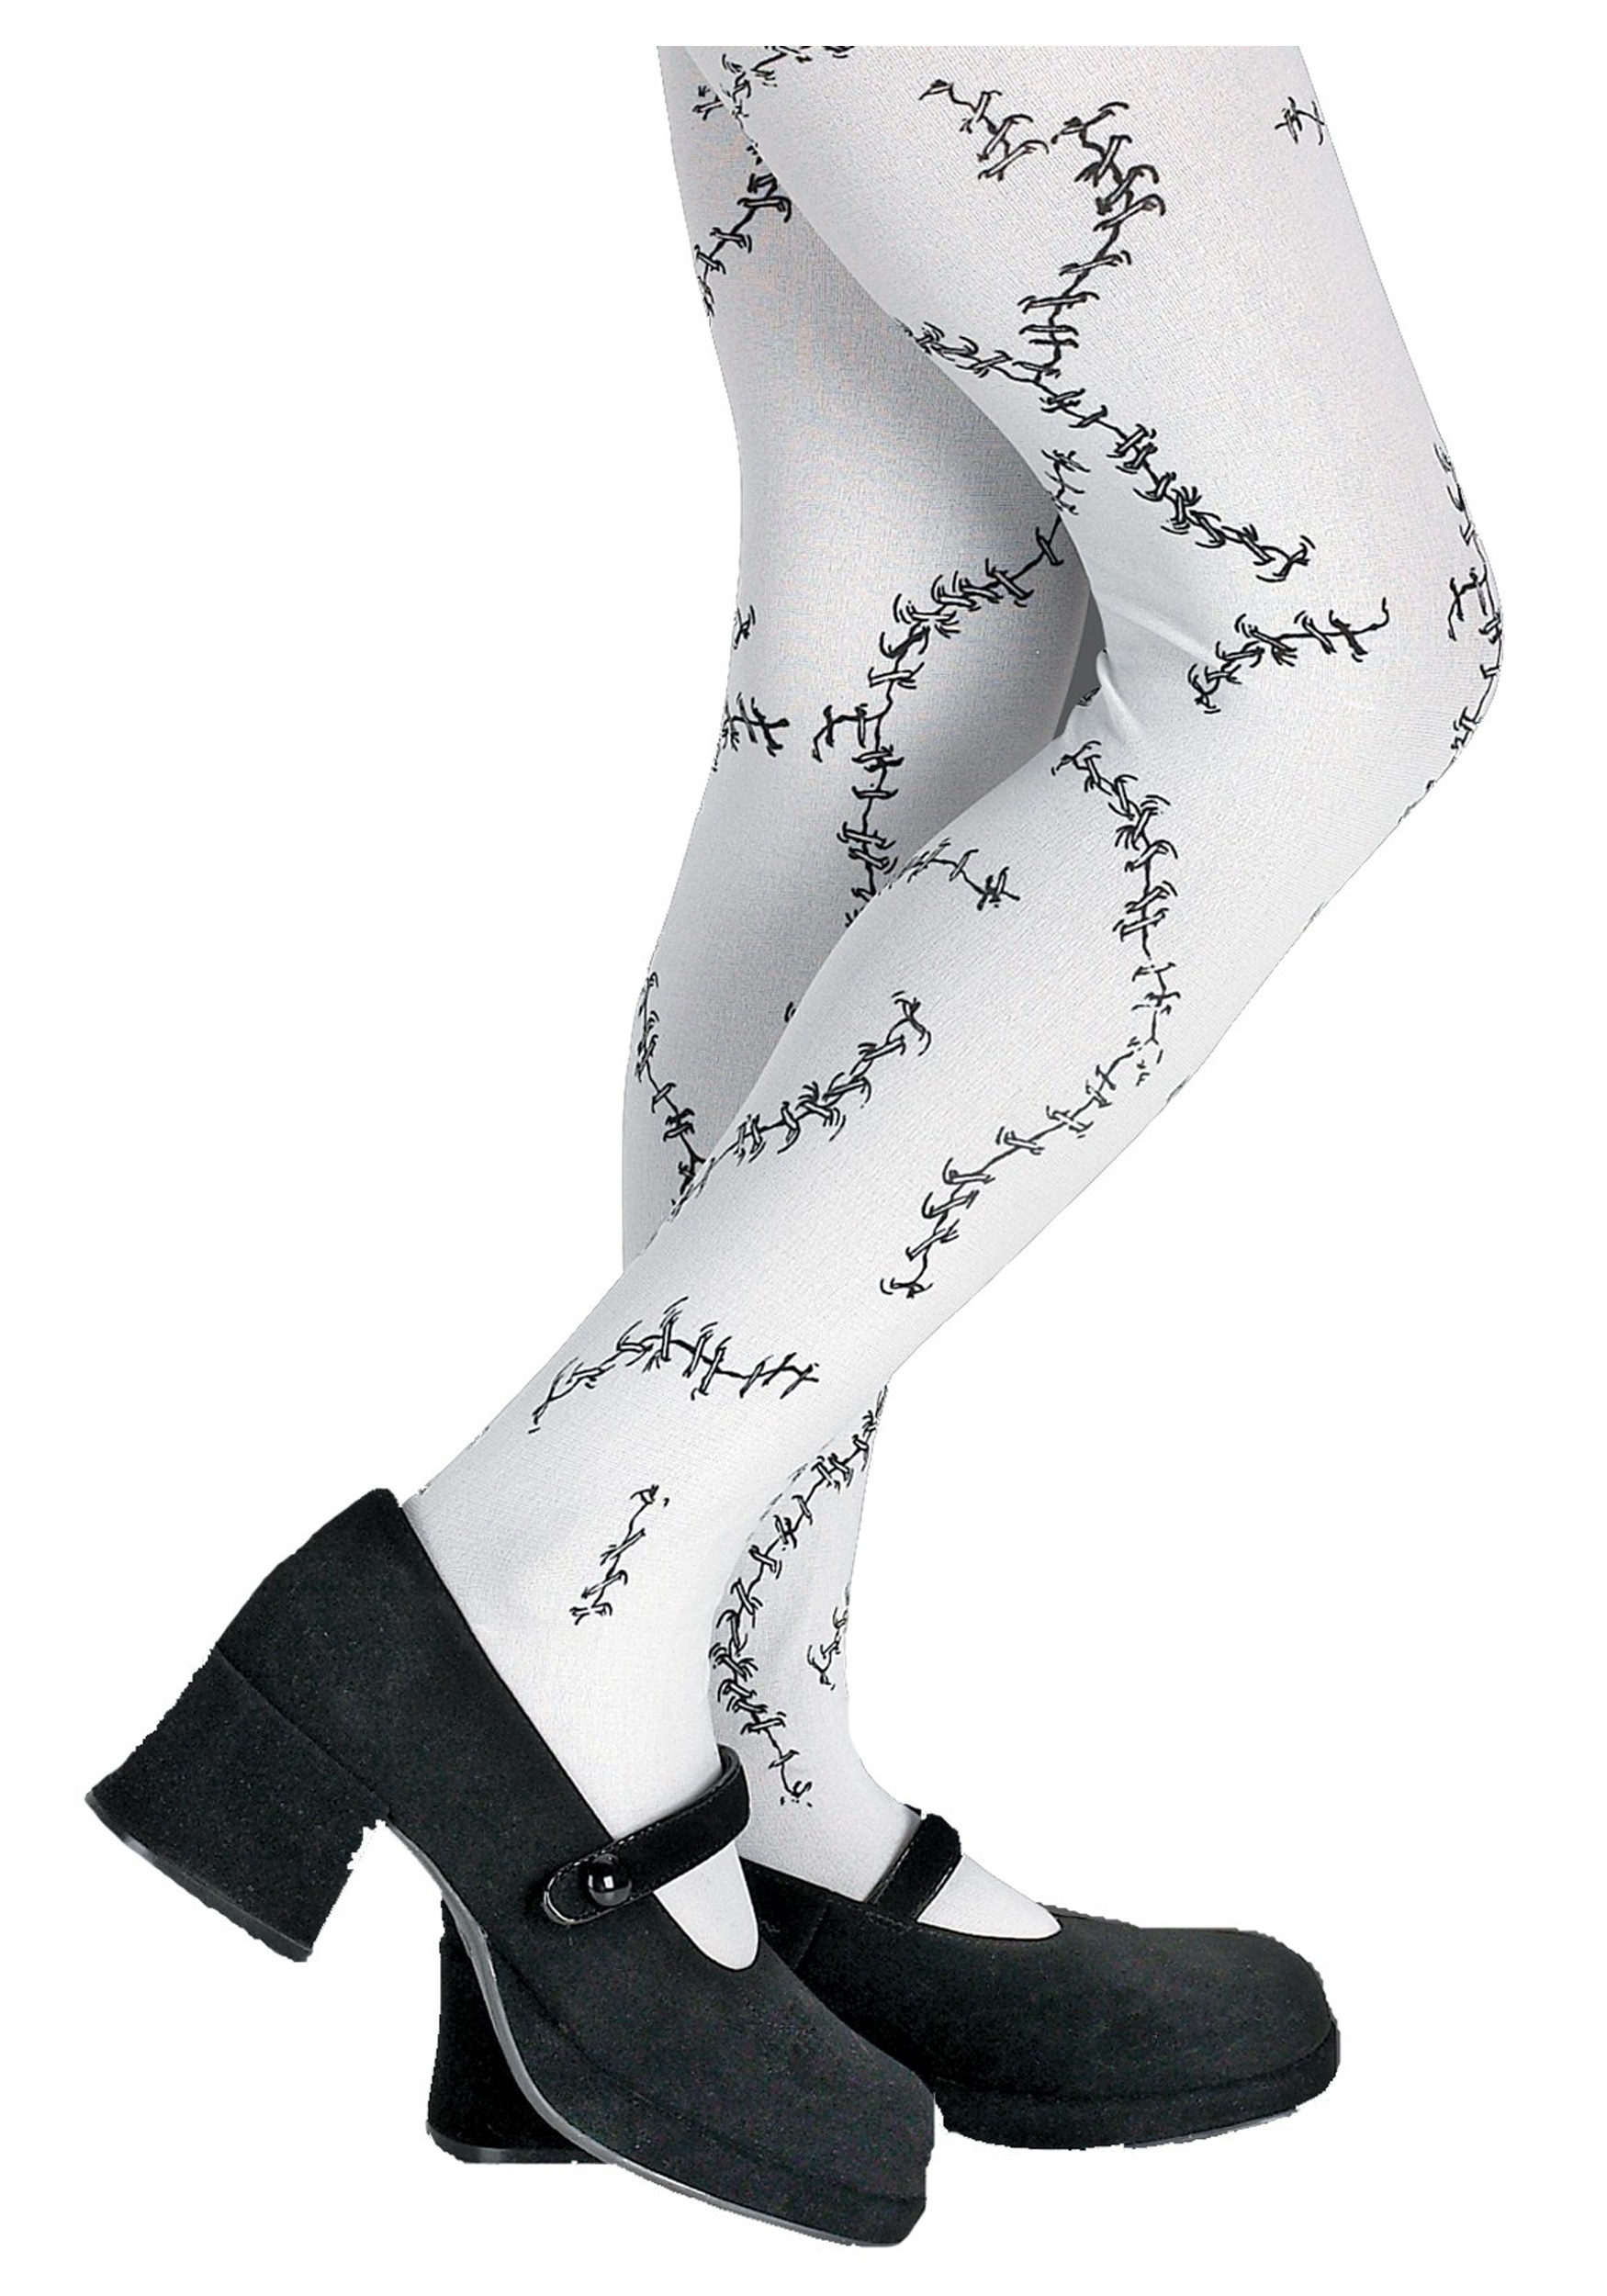 https://images.halloweencostumes.com/products/2488/1-1/kids-stitched-tights.jpg